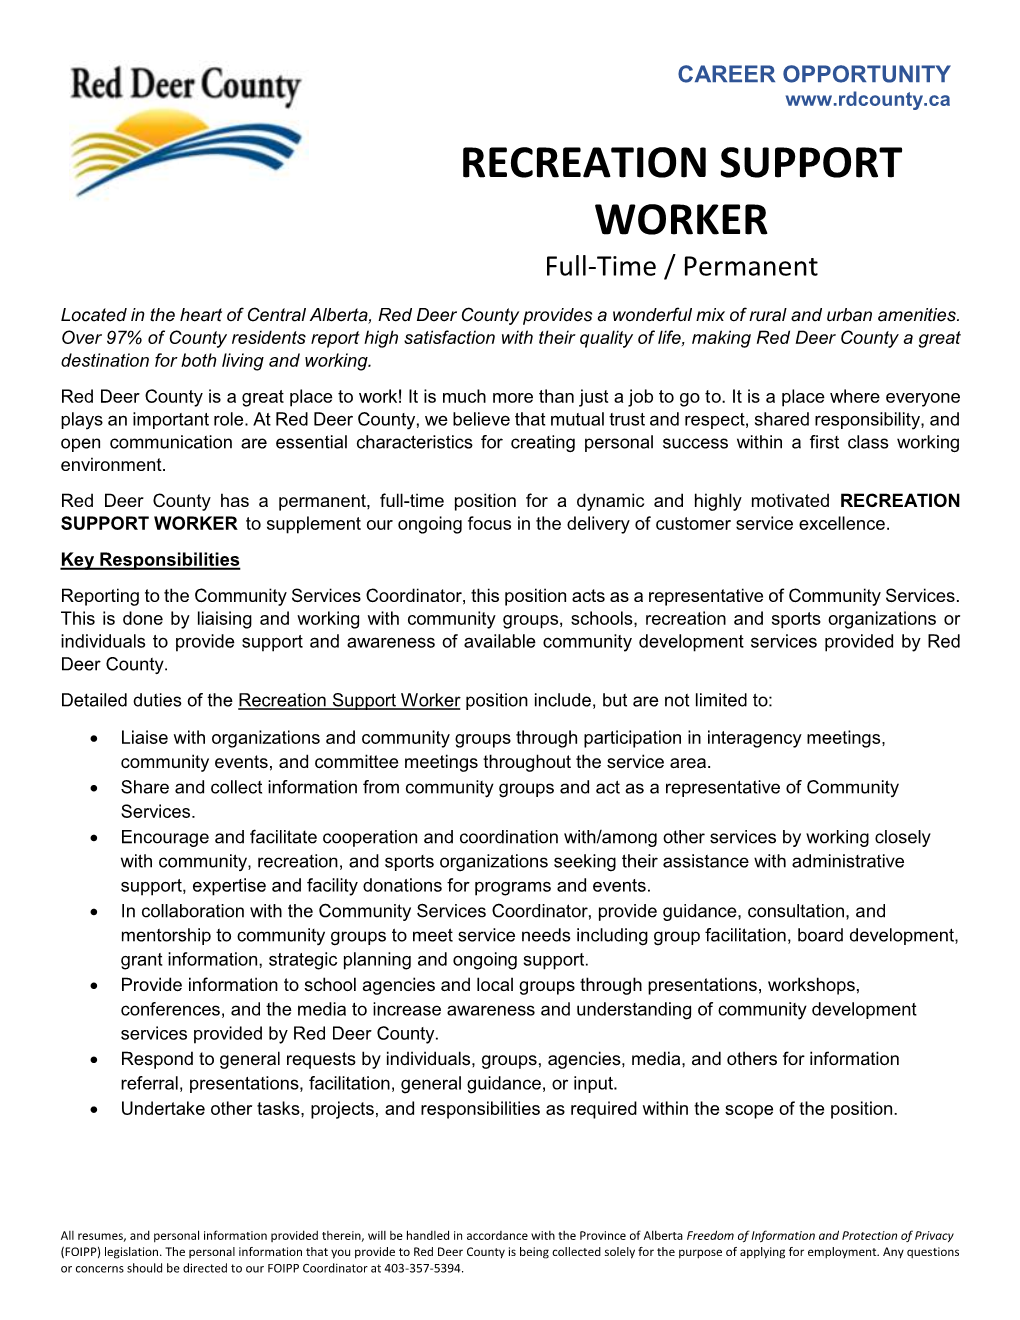 RECREATION SUPPORT WORKER to Supplement Our Ongoing Focus in the Delivery of Customer Service Excellence